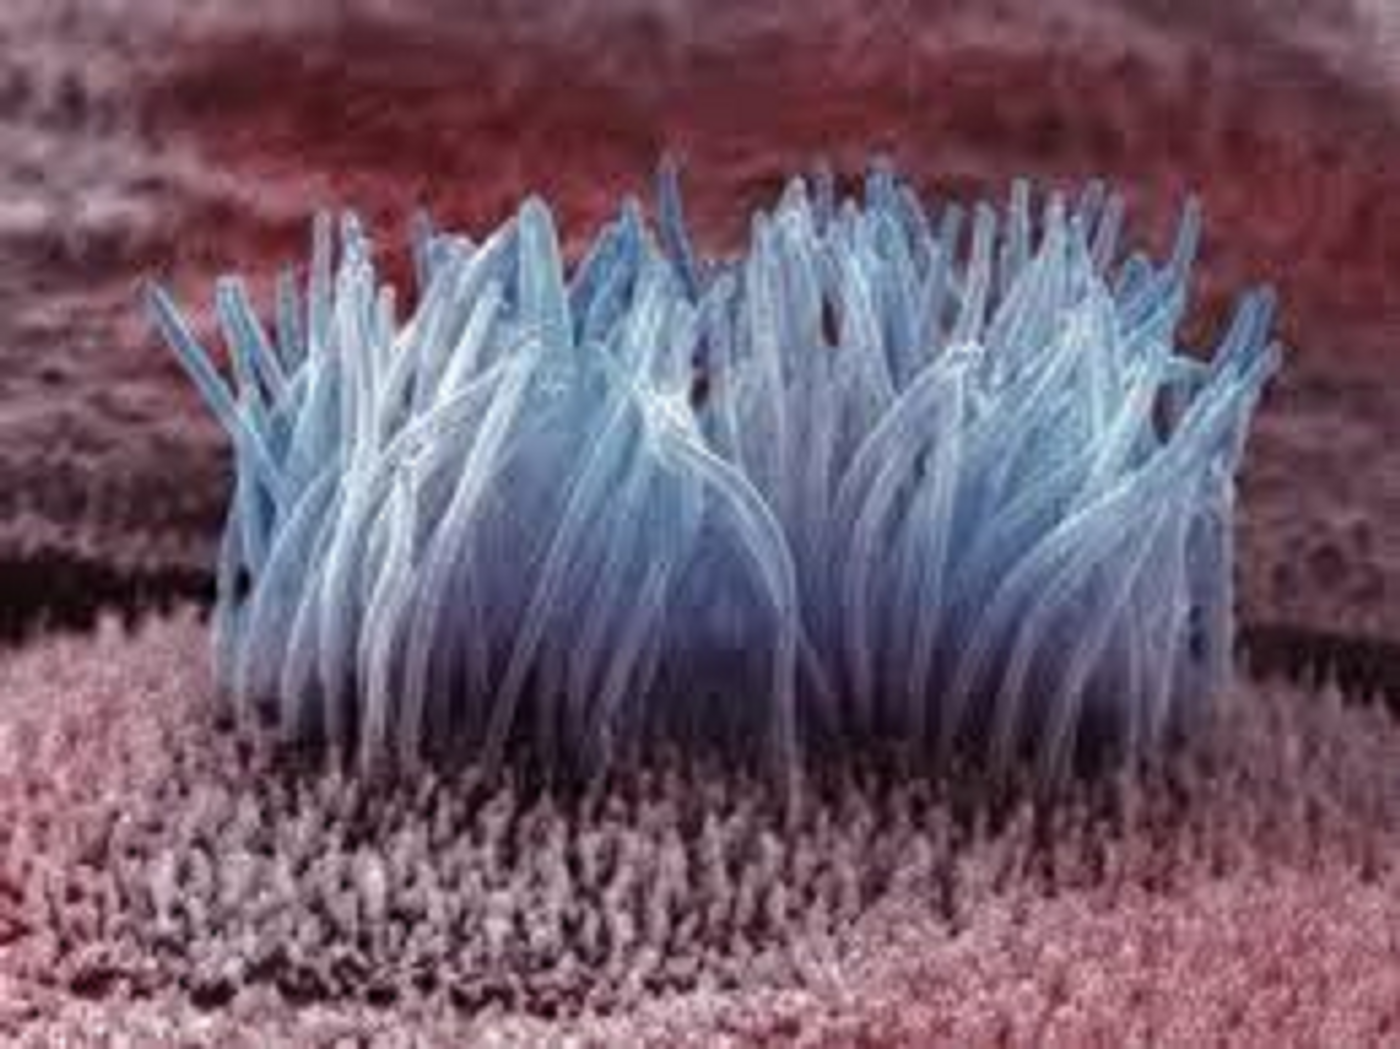 Cilia are located on almost all mammalian cells and can be either motile or non-motile serving as sensors to the cells.